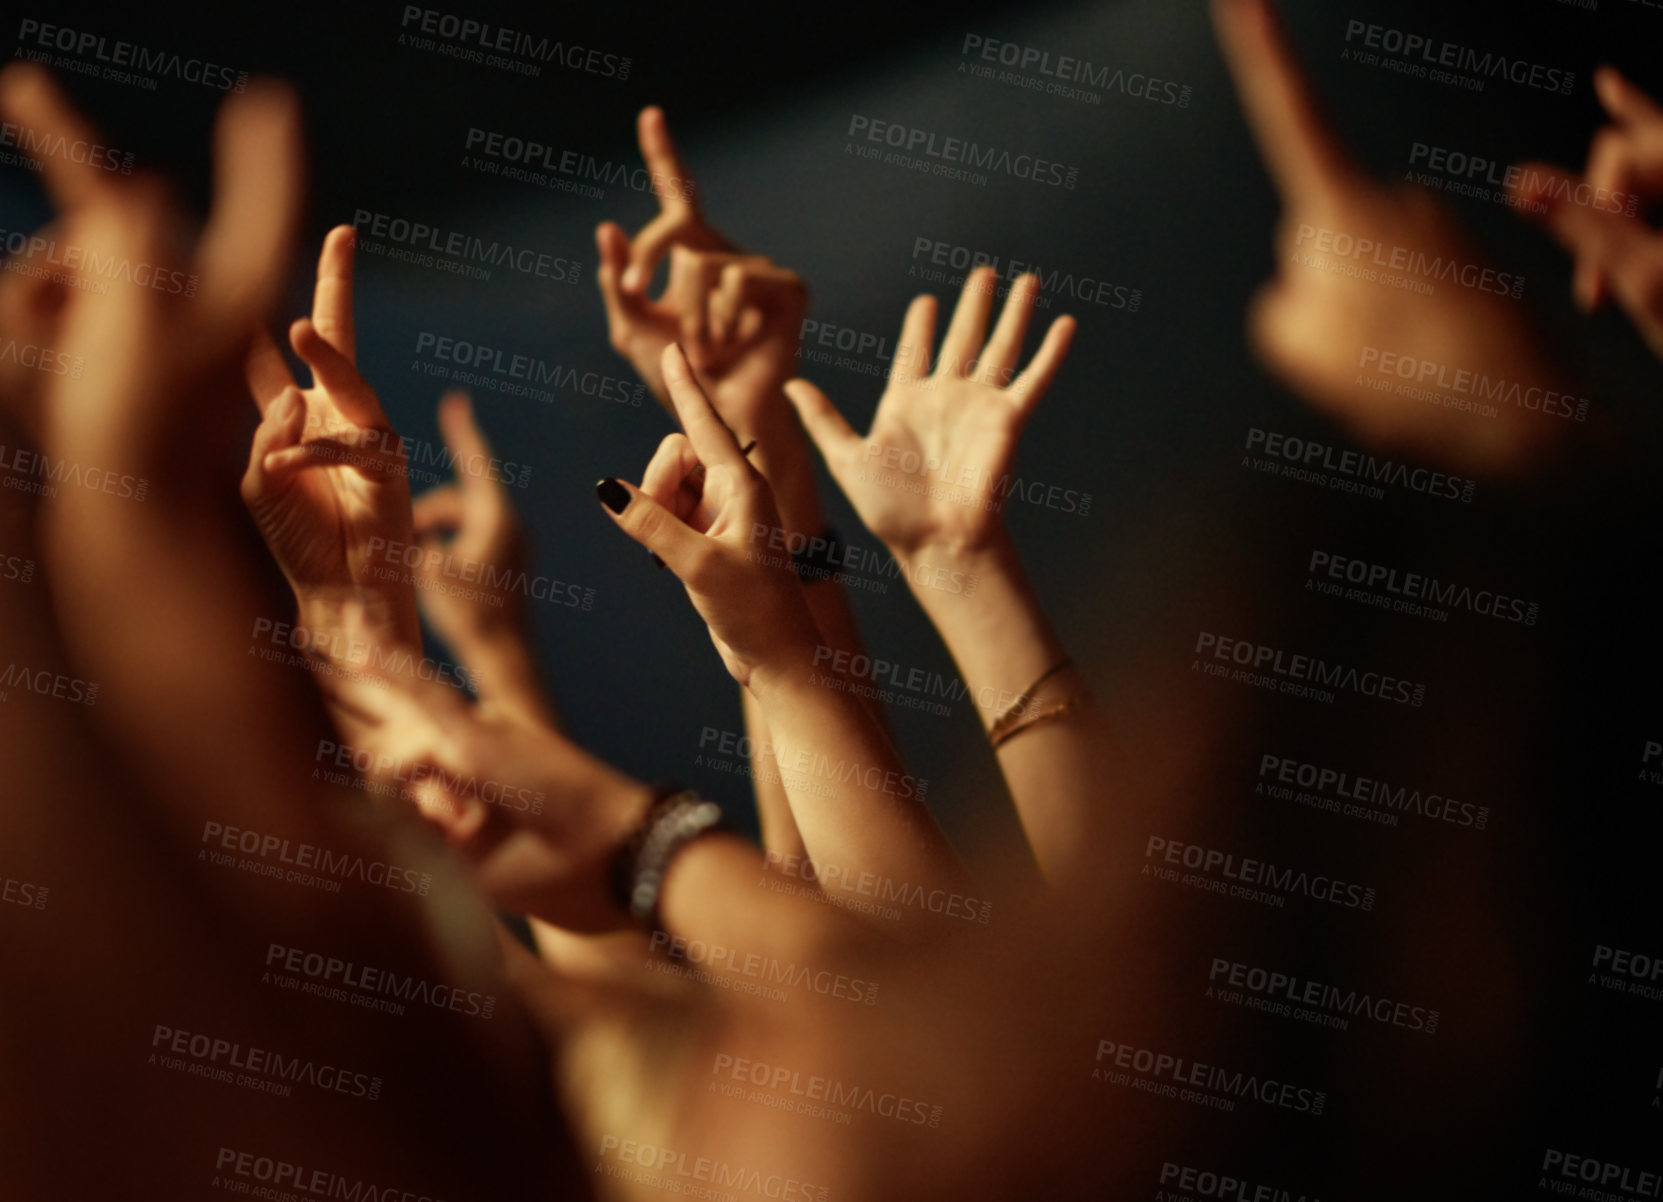 Buy stock photo A crowd of people raising their arms to the music